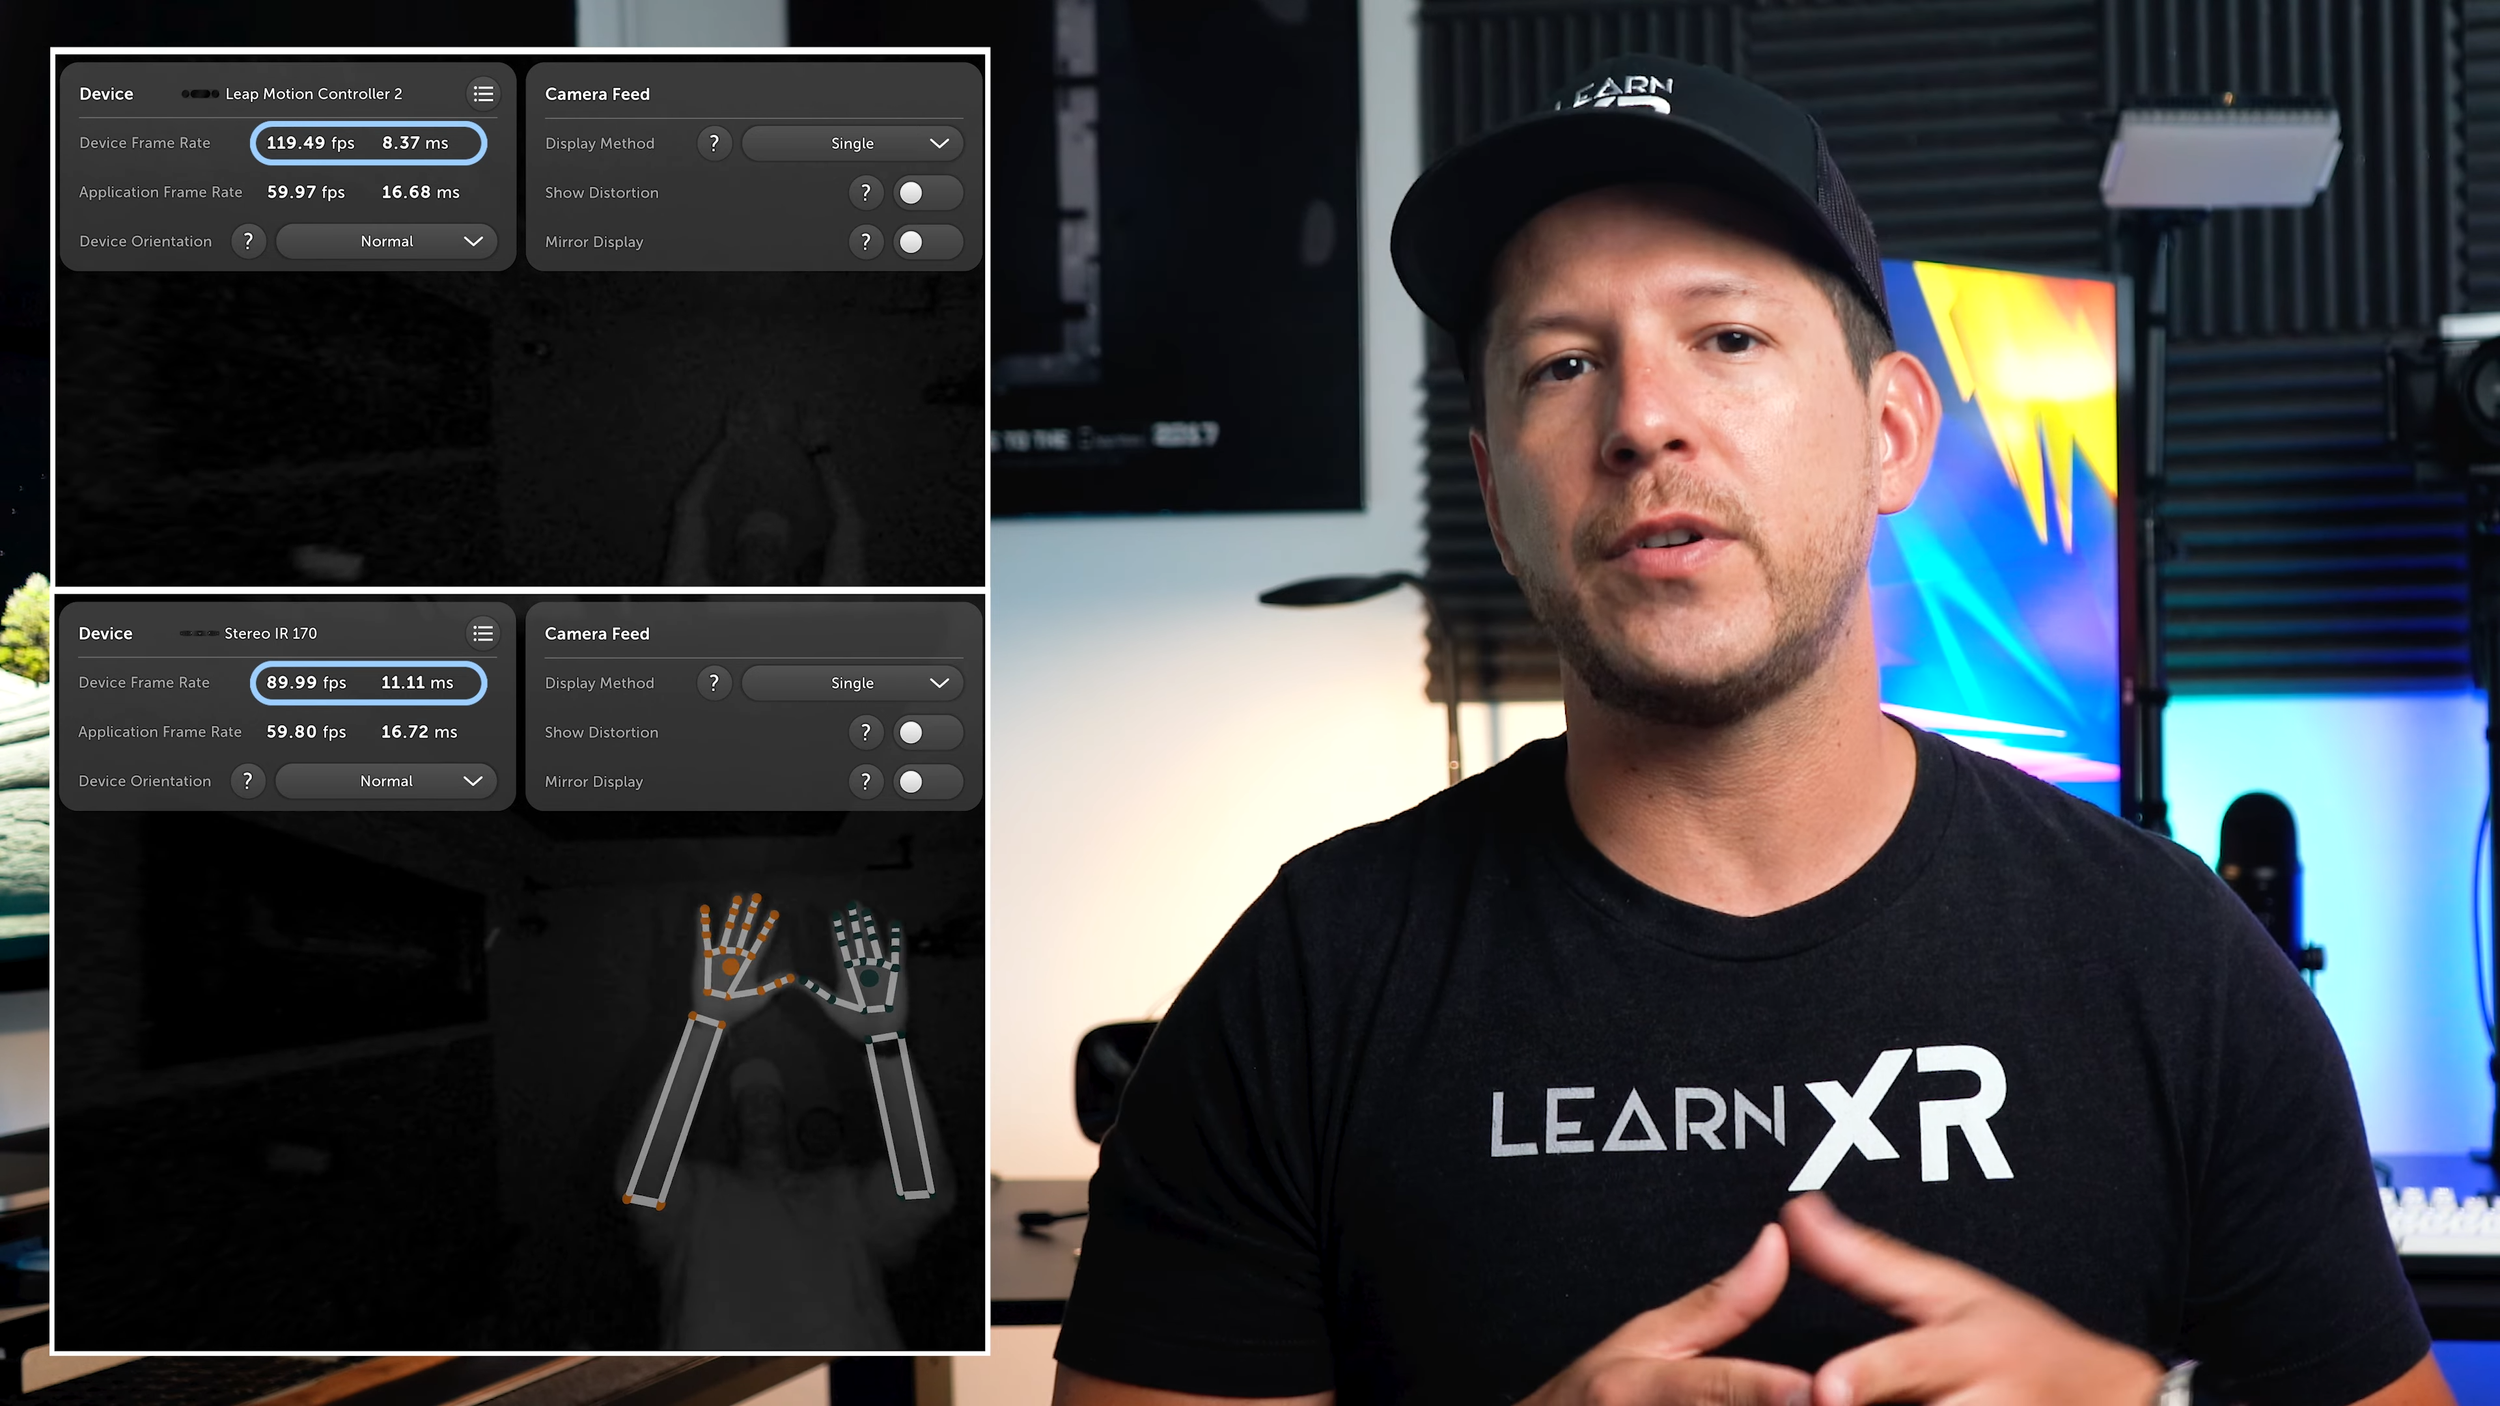 Ultraleap Leap Motion Controller 2 Is Here! (Specs, Demos, & Dev Tools) 1-15 screenshot.png